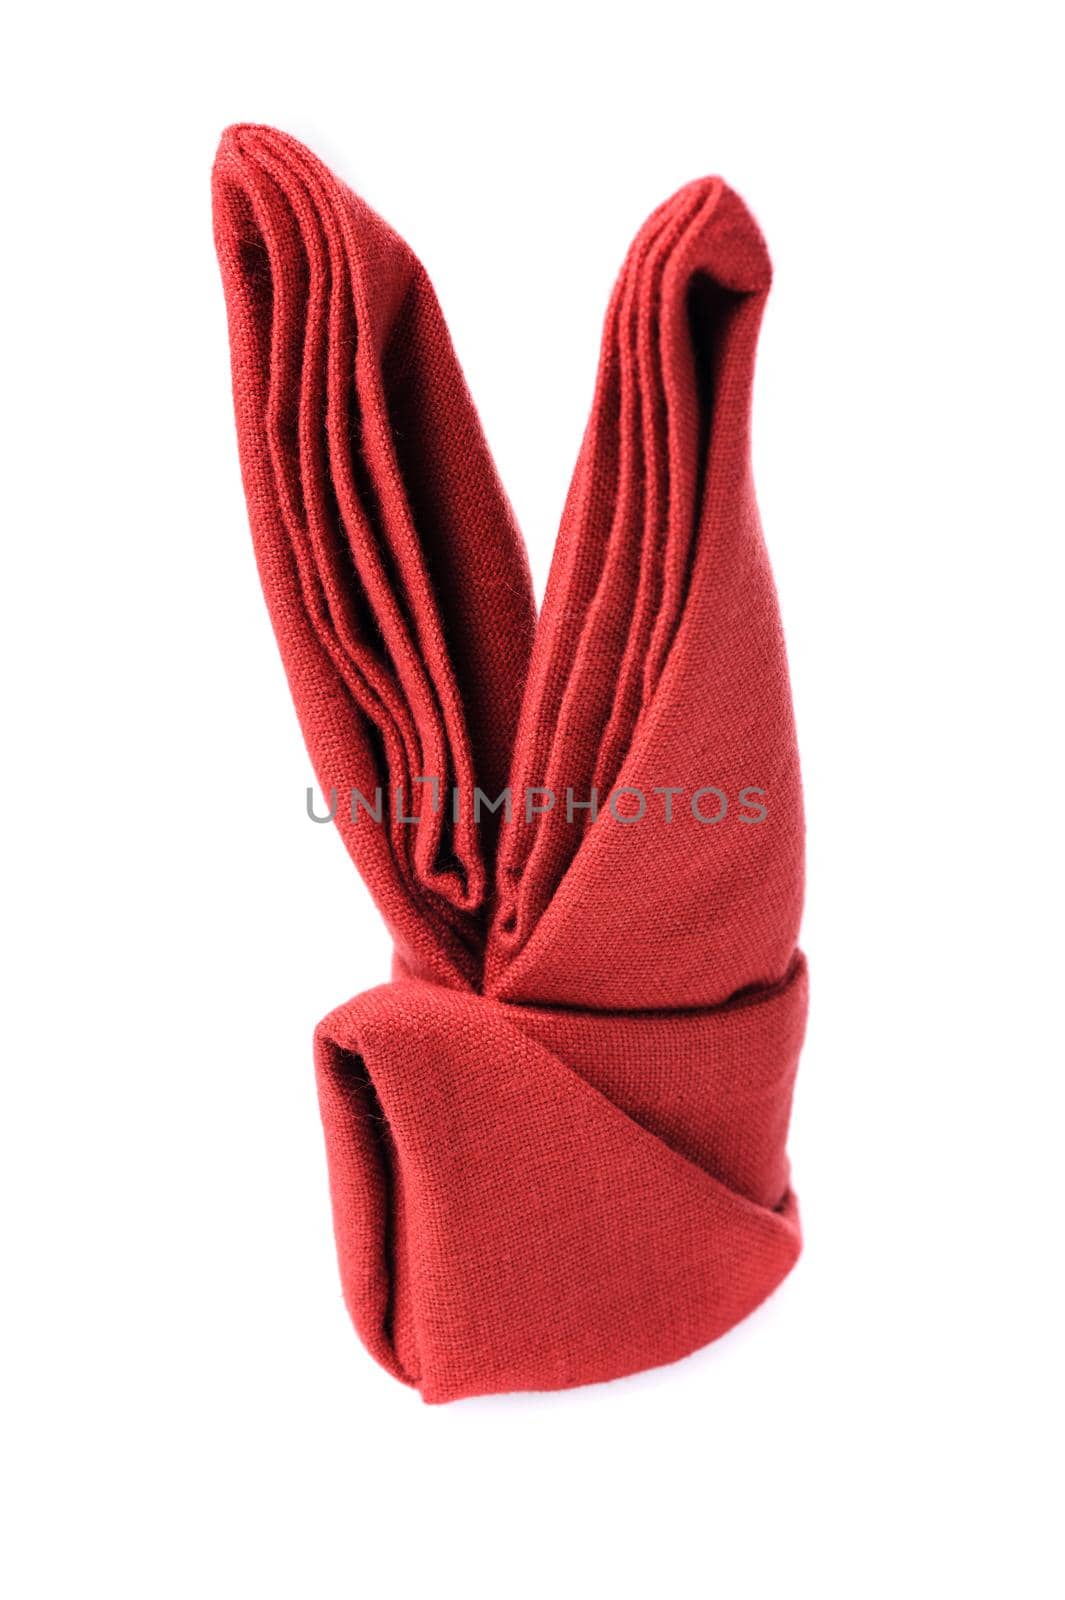 folded red napkin by norgal